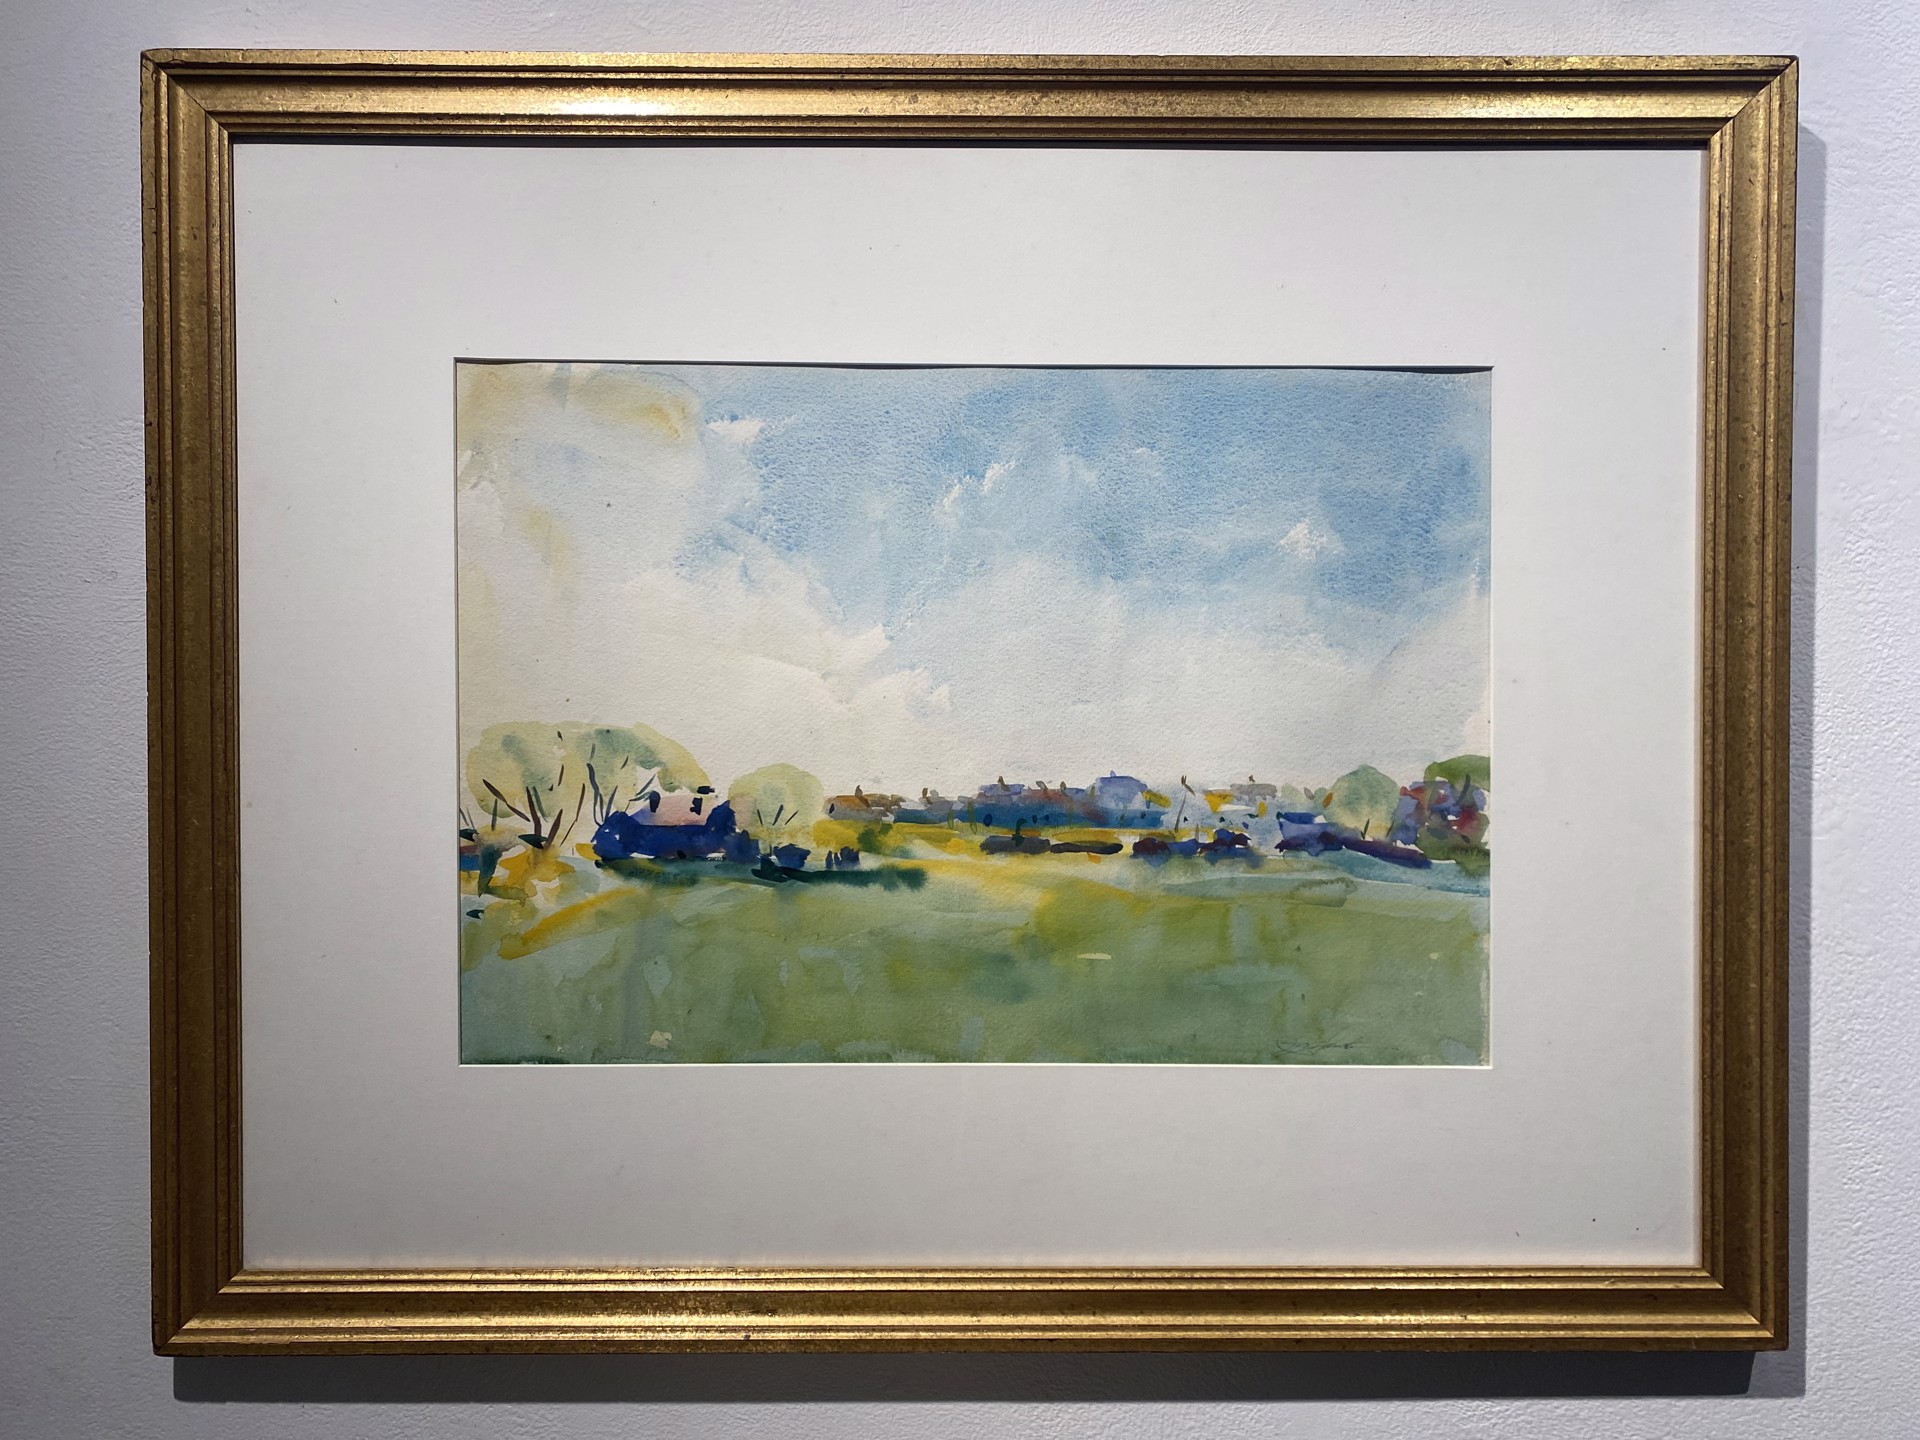 The Pasture, Provincetown by Charles W. Hawthorne